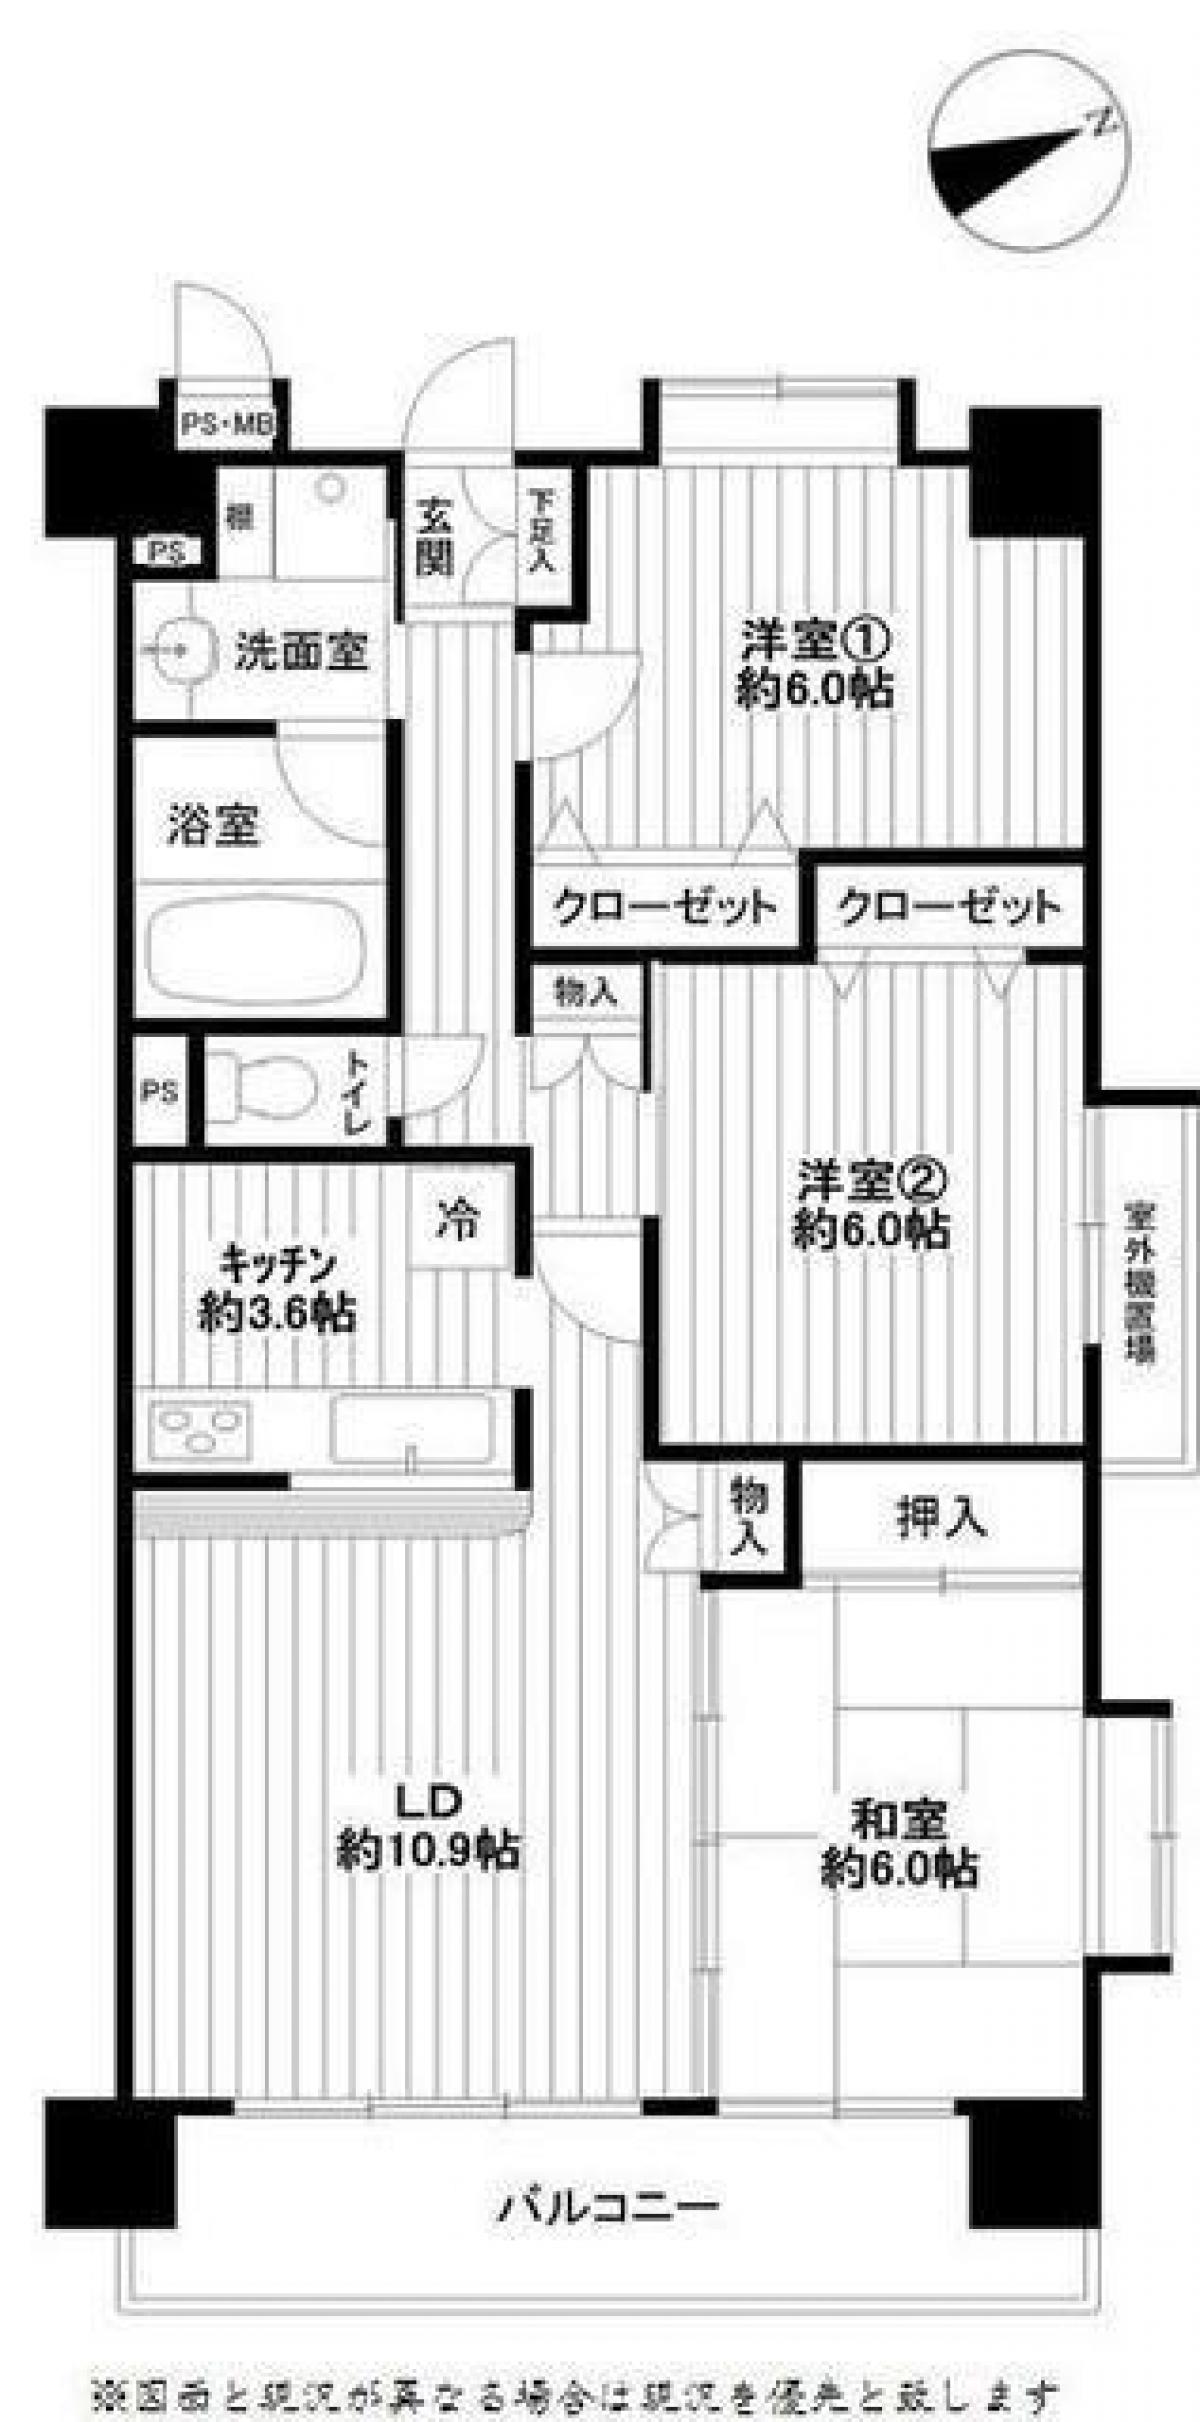 Picture of Apartment For Sale in Hanno Shi, Saitama, Japan